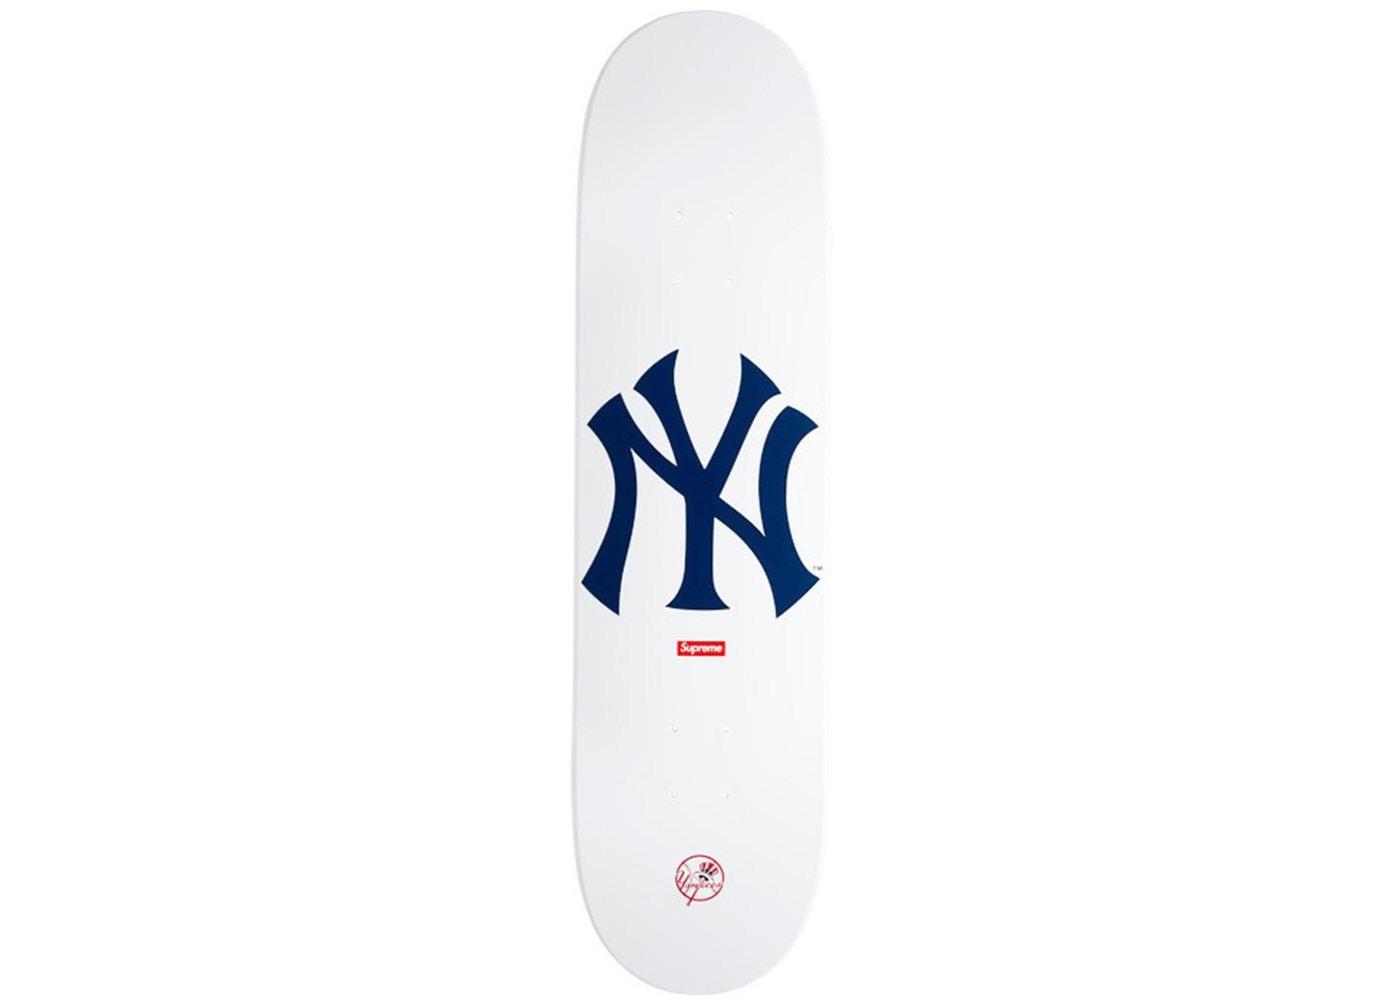 Supreme teamed up with New York Yankees for a collaborative collection